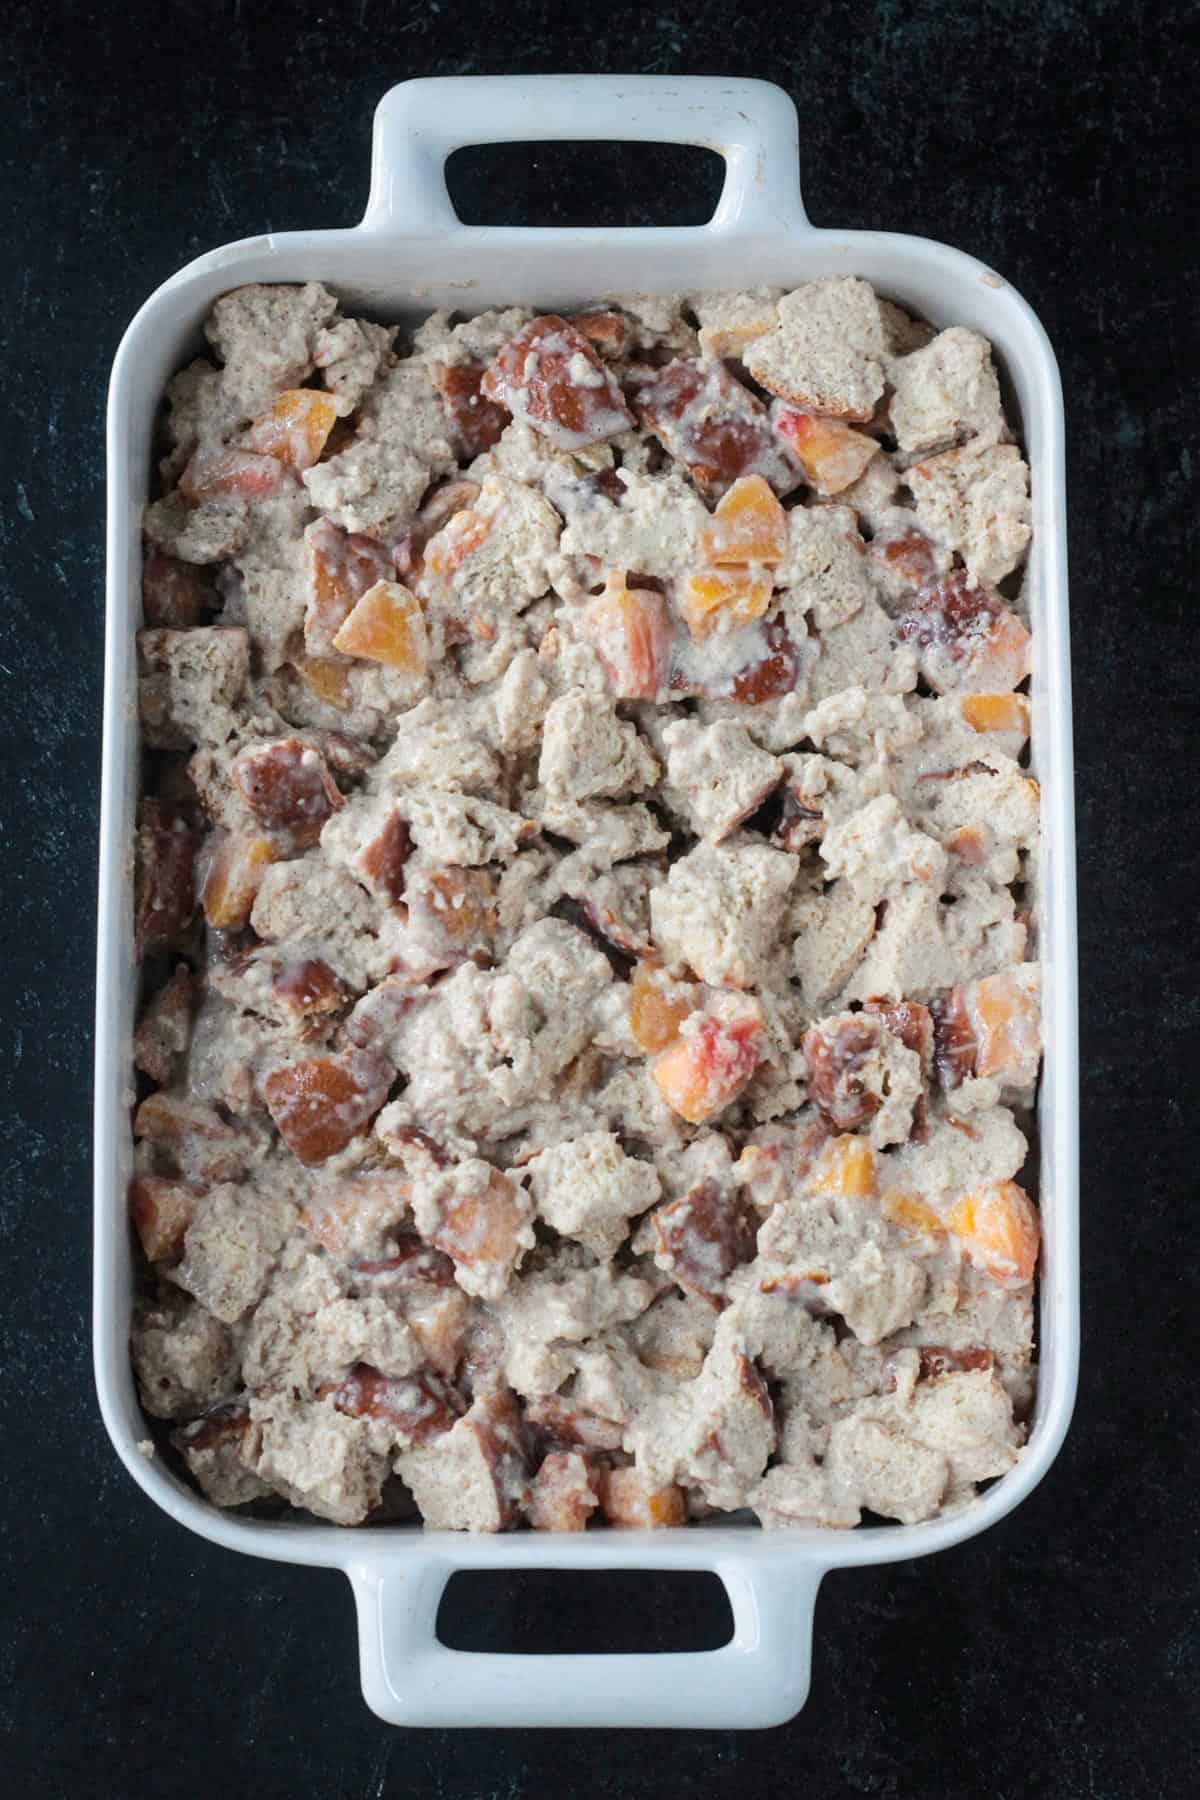 Unbaked casserole in a baking dish.